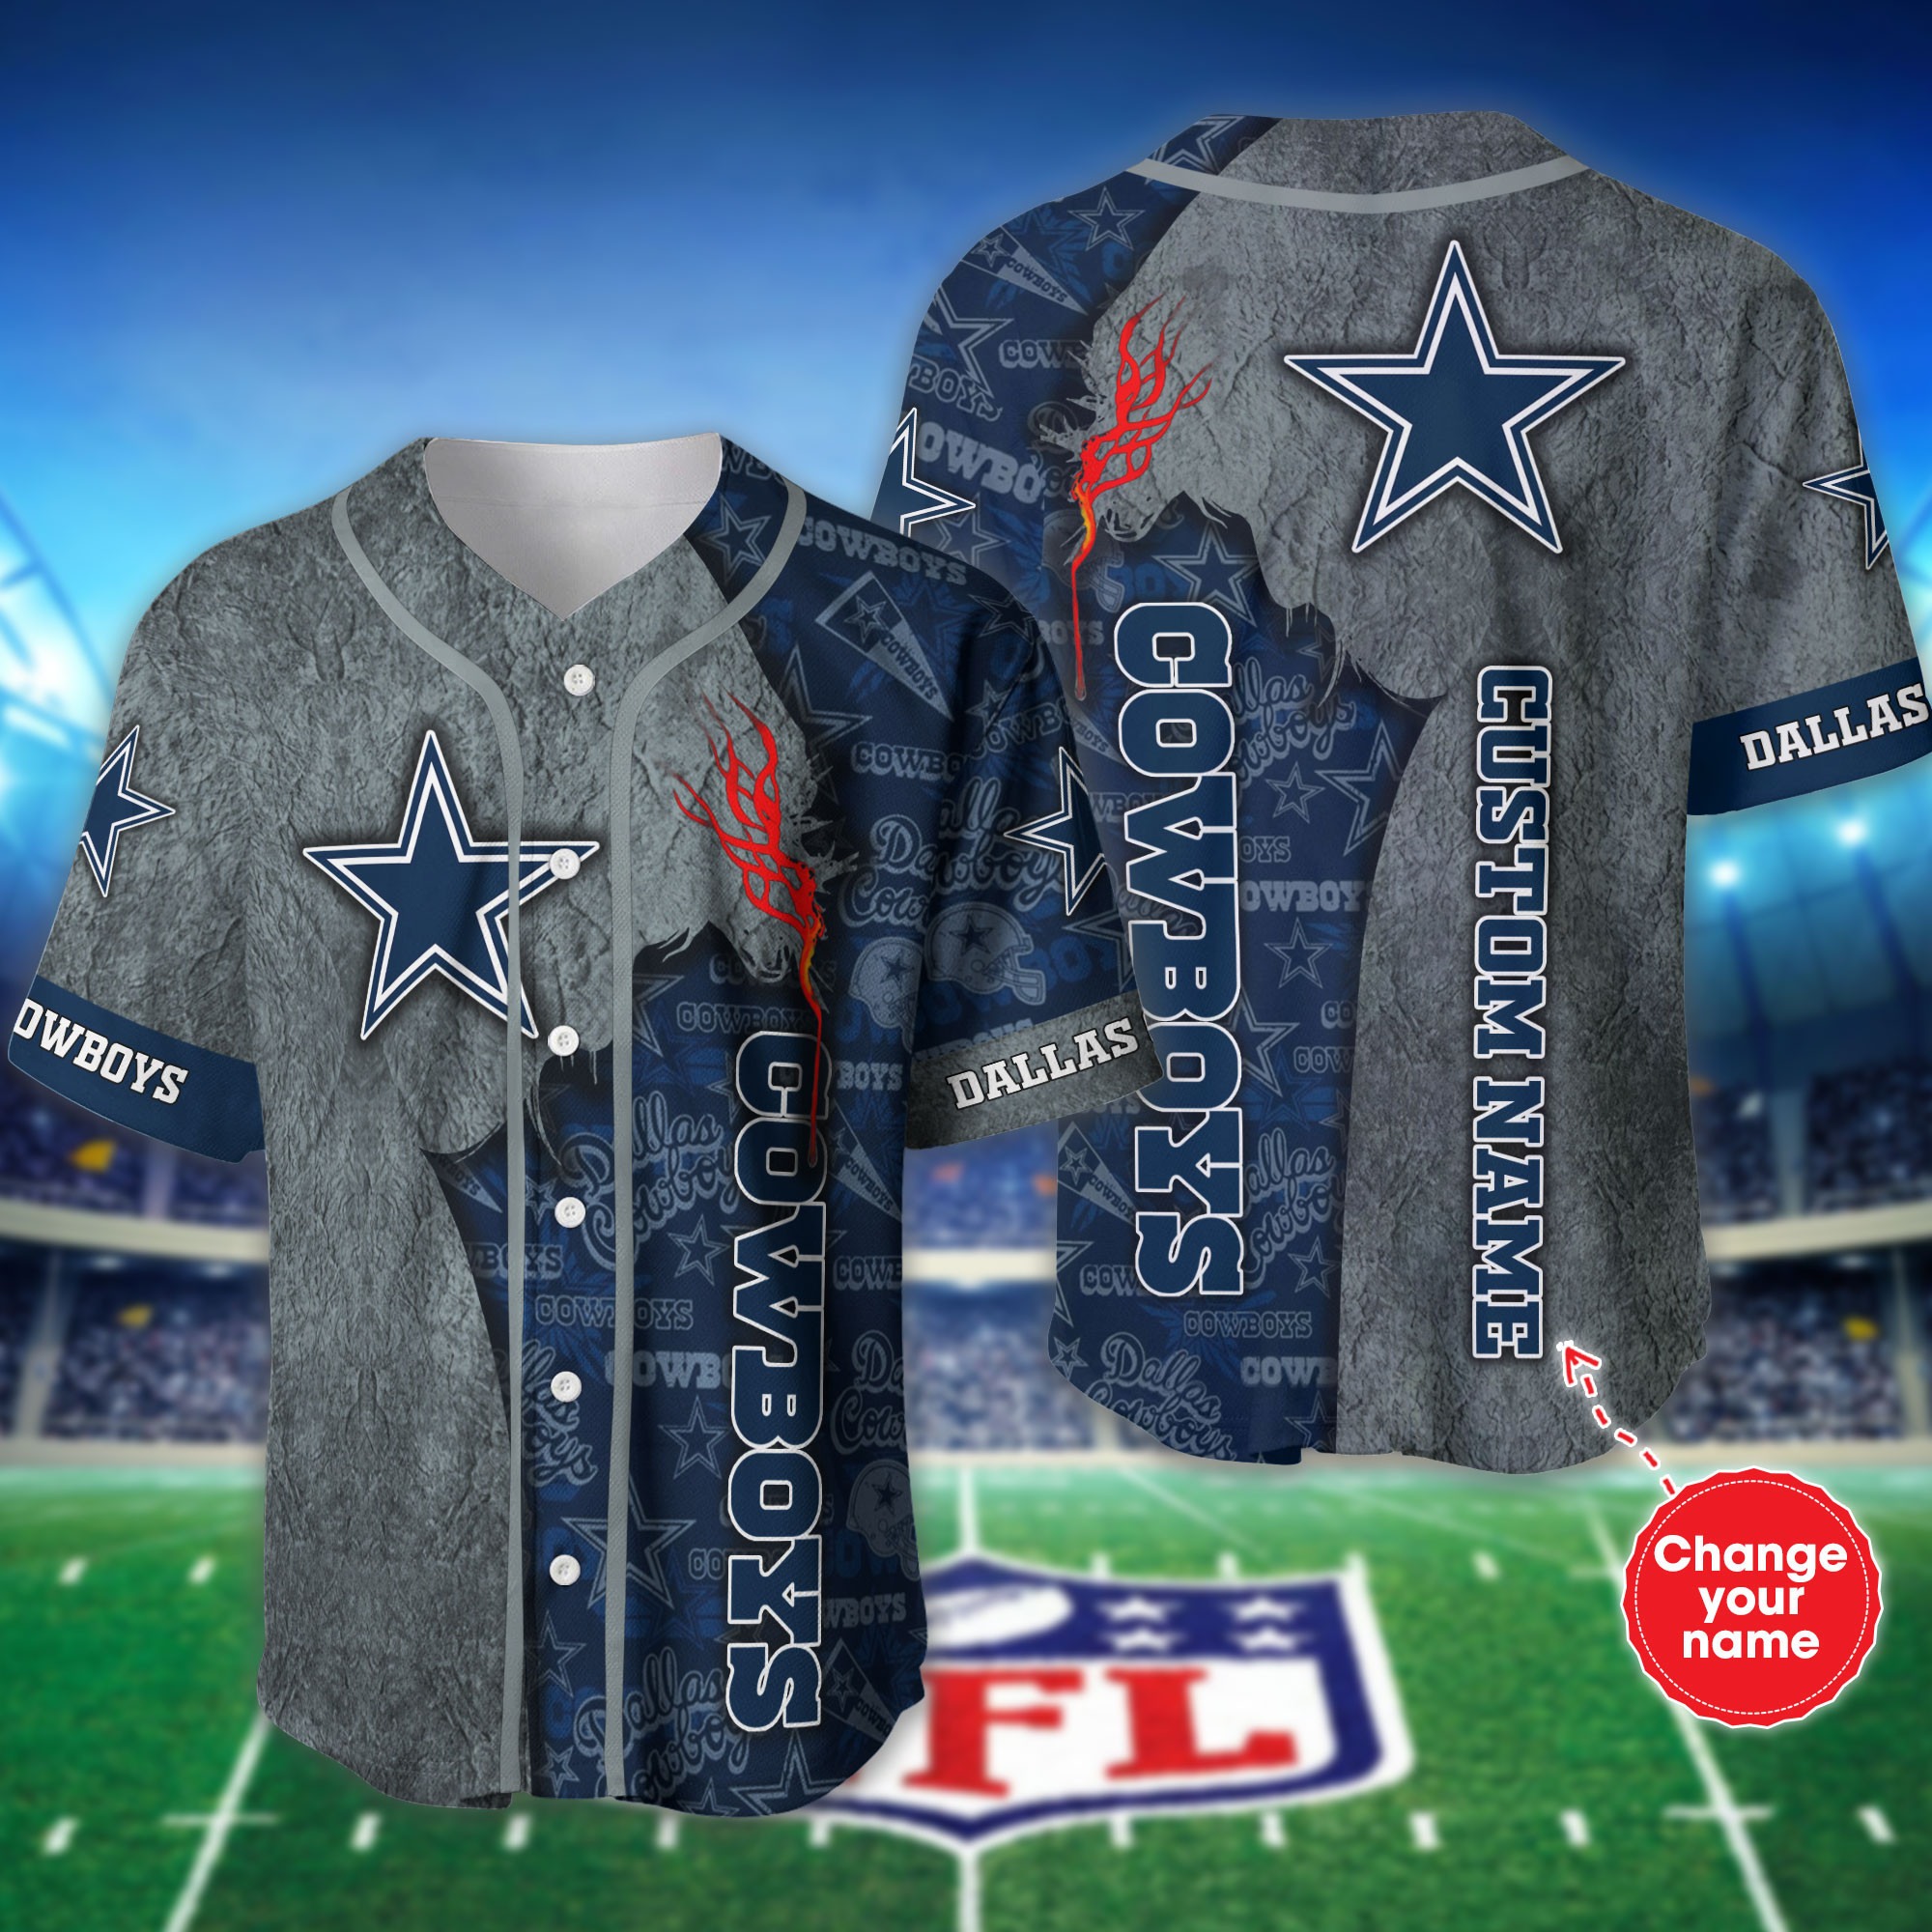 NFL Personalized DALLAS COWBOYS Baseball Jersey shirt for fans